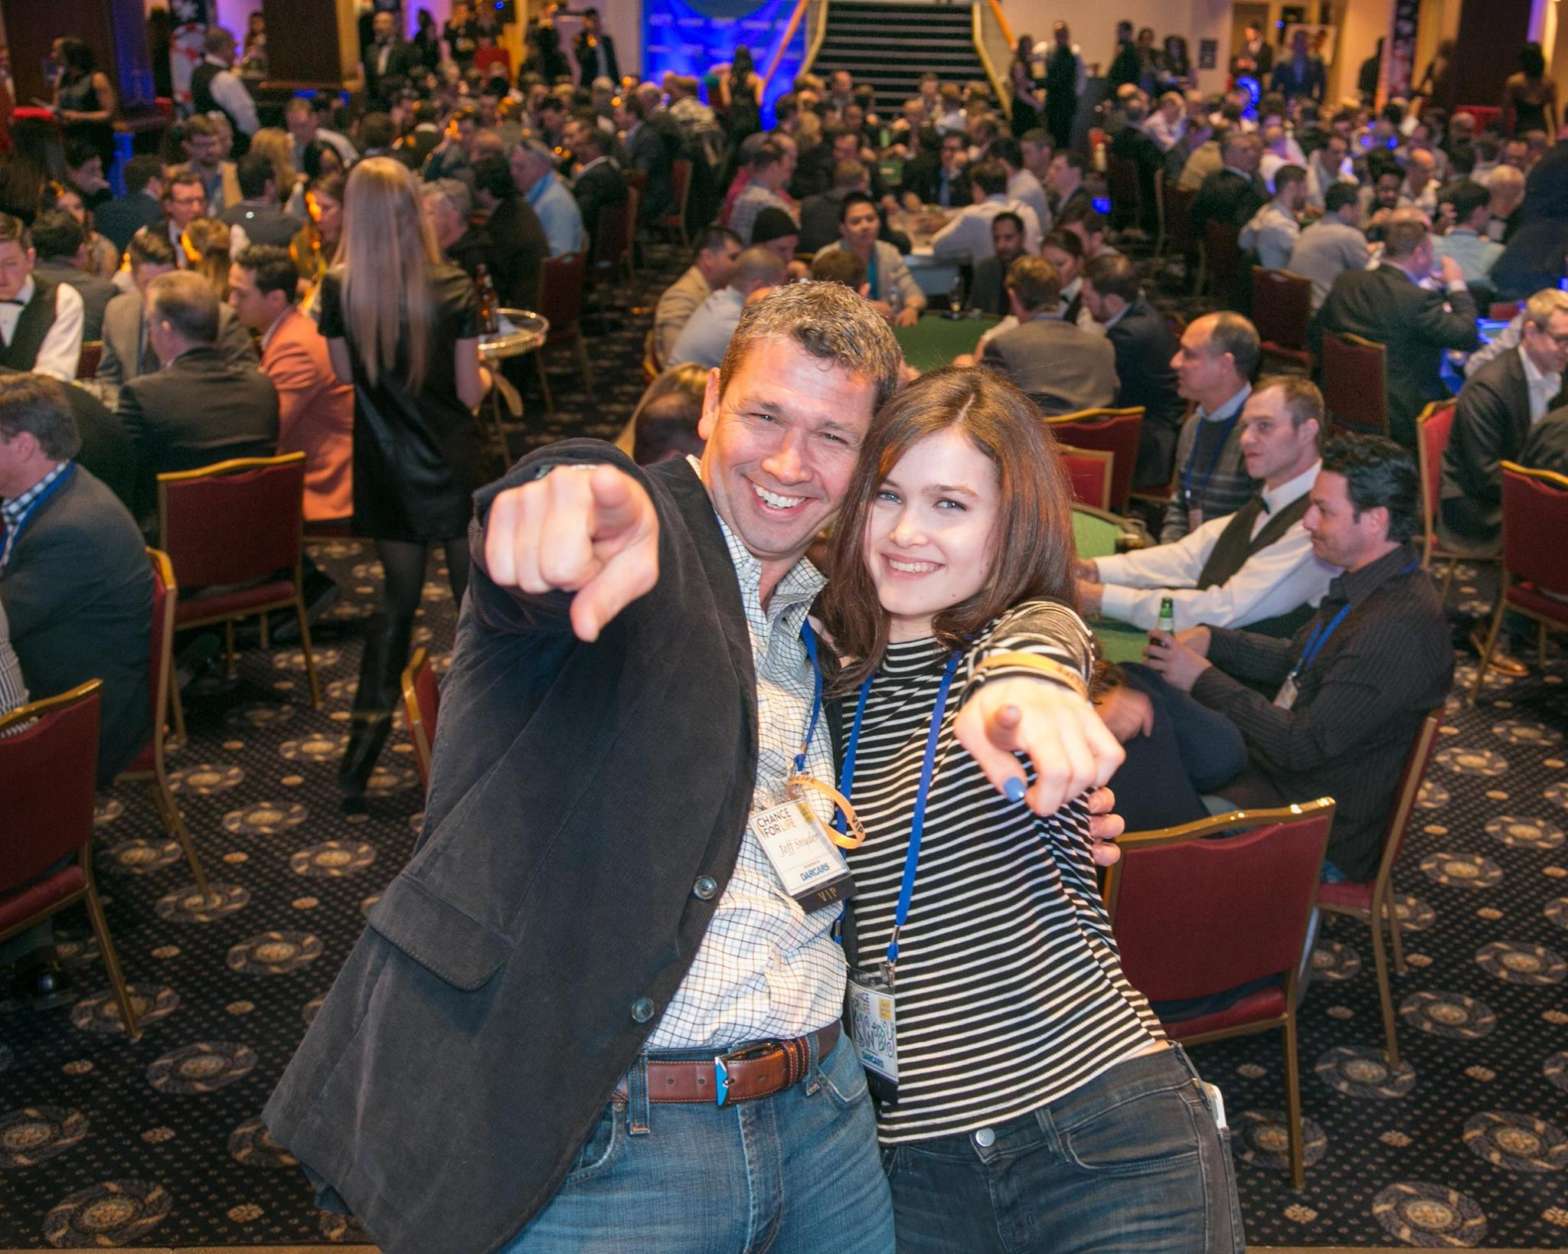 Kennedy Snyder and father Jeff were among the attendees at the 2016 Chance For Life poker tournament. (Photo courtesy Chance for Life)